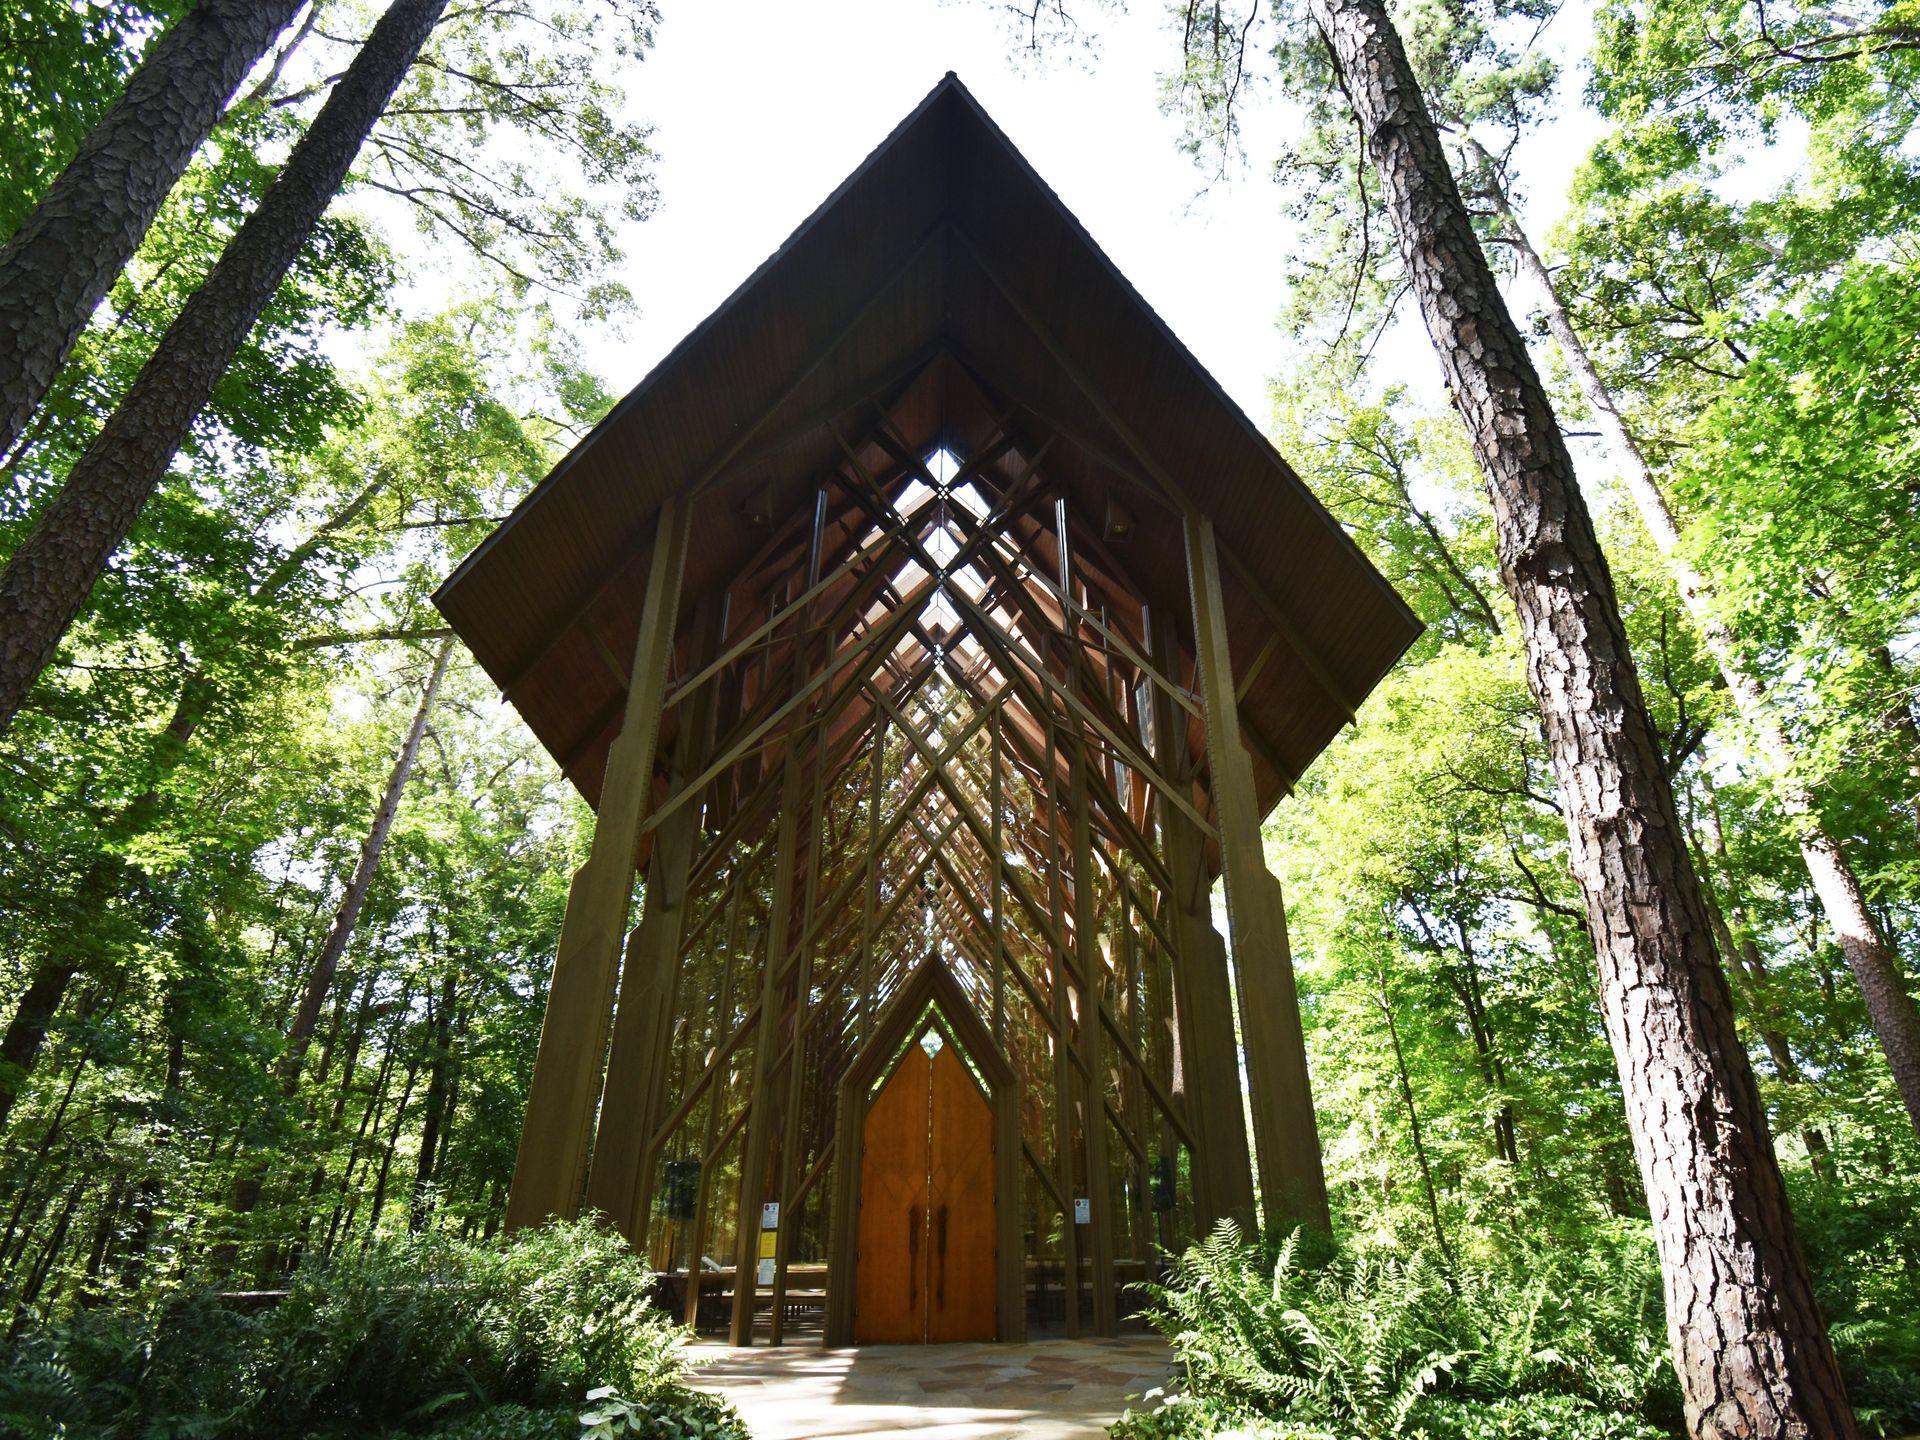 A glass church in the forest at Garvan Woodland Gardens.